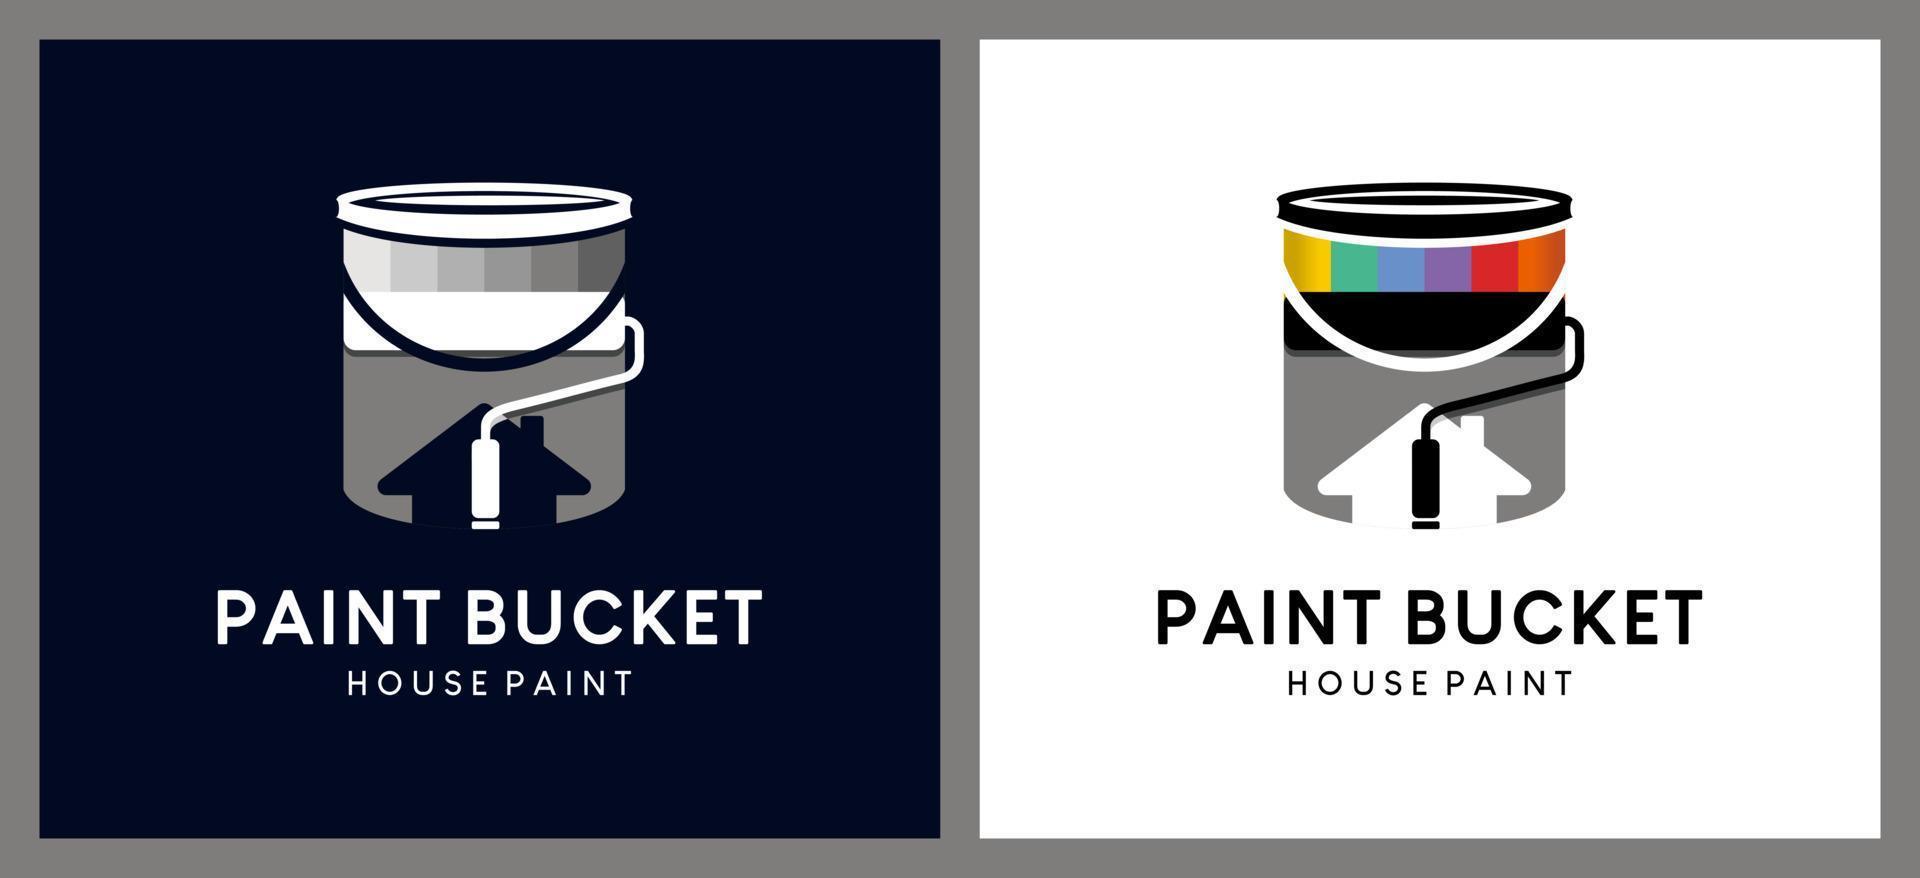 Paint bucket vector illustration logo design, combination of paint bucket, house and roller icon